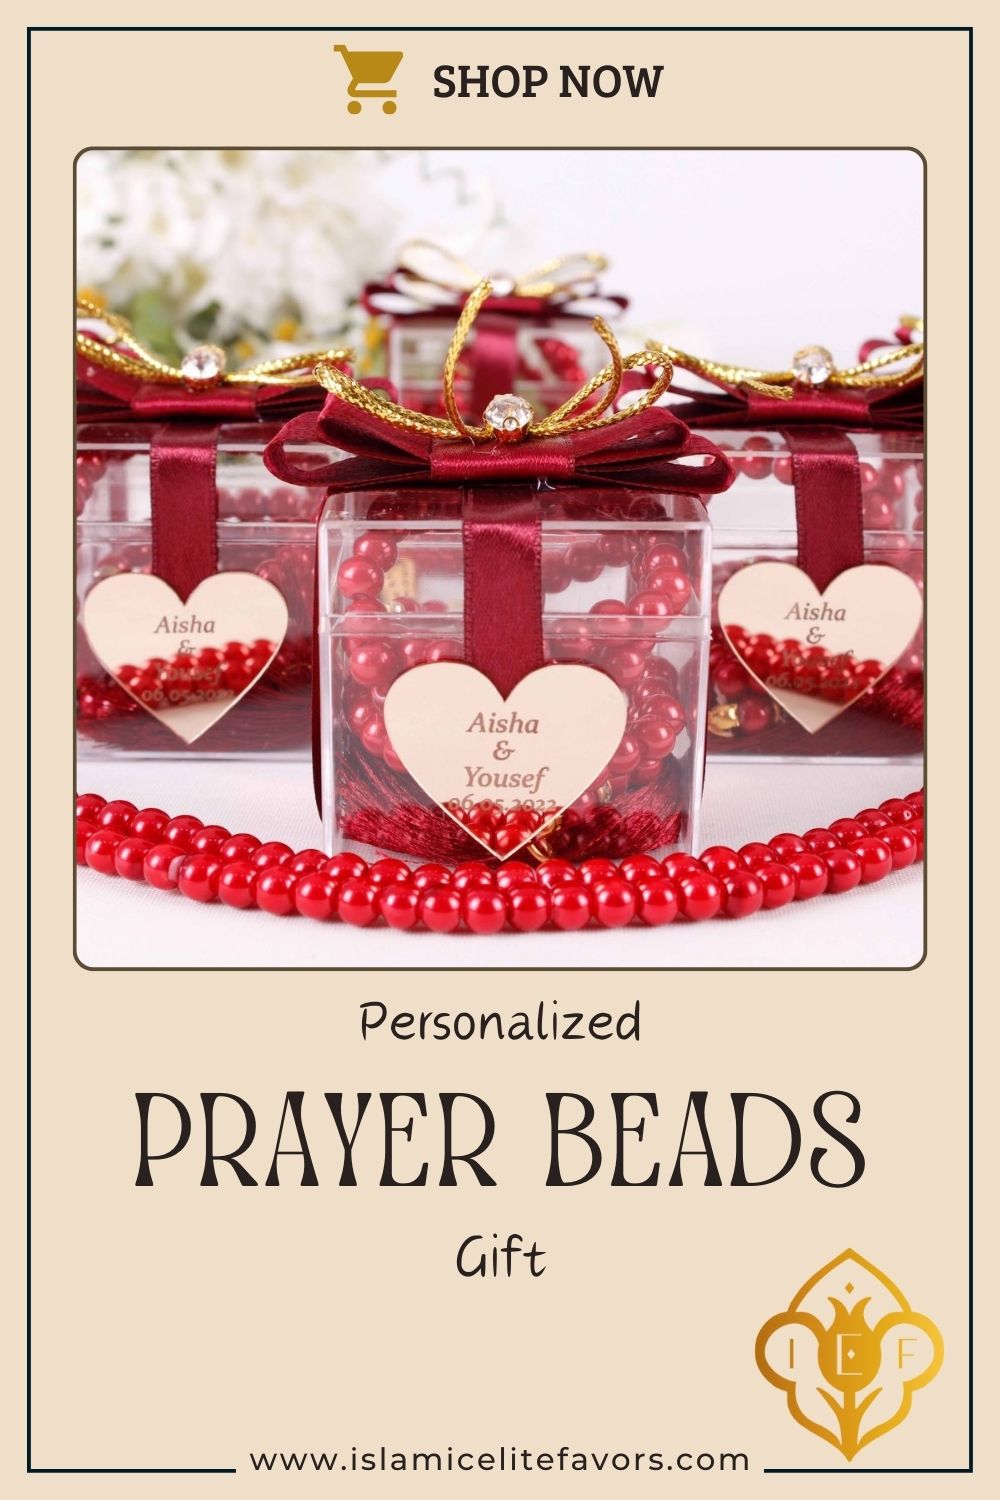 Personalized Prayer Beads Wedding Favor Decorated Gift Box with Heart - Islamic Elite Favors is a handmade gift shop offering a wide variety of unique and personalized gifts for all occasions. Whether you're looking for the perfect Ramadan, Eid, Hajj, wedding gift or something special for a birthday, baby shower or anniversary, we have something for everyone. High quality, made with love.